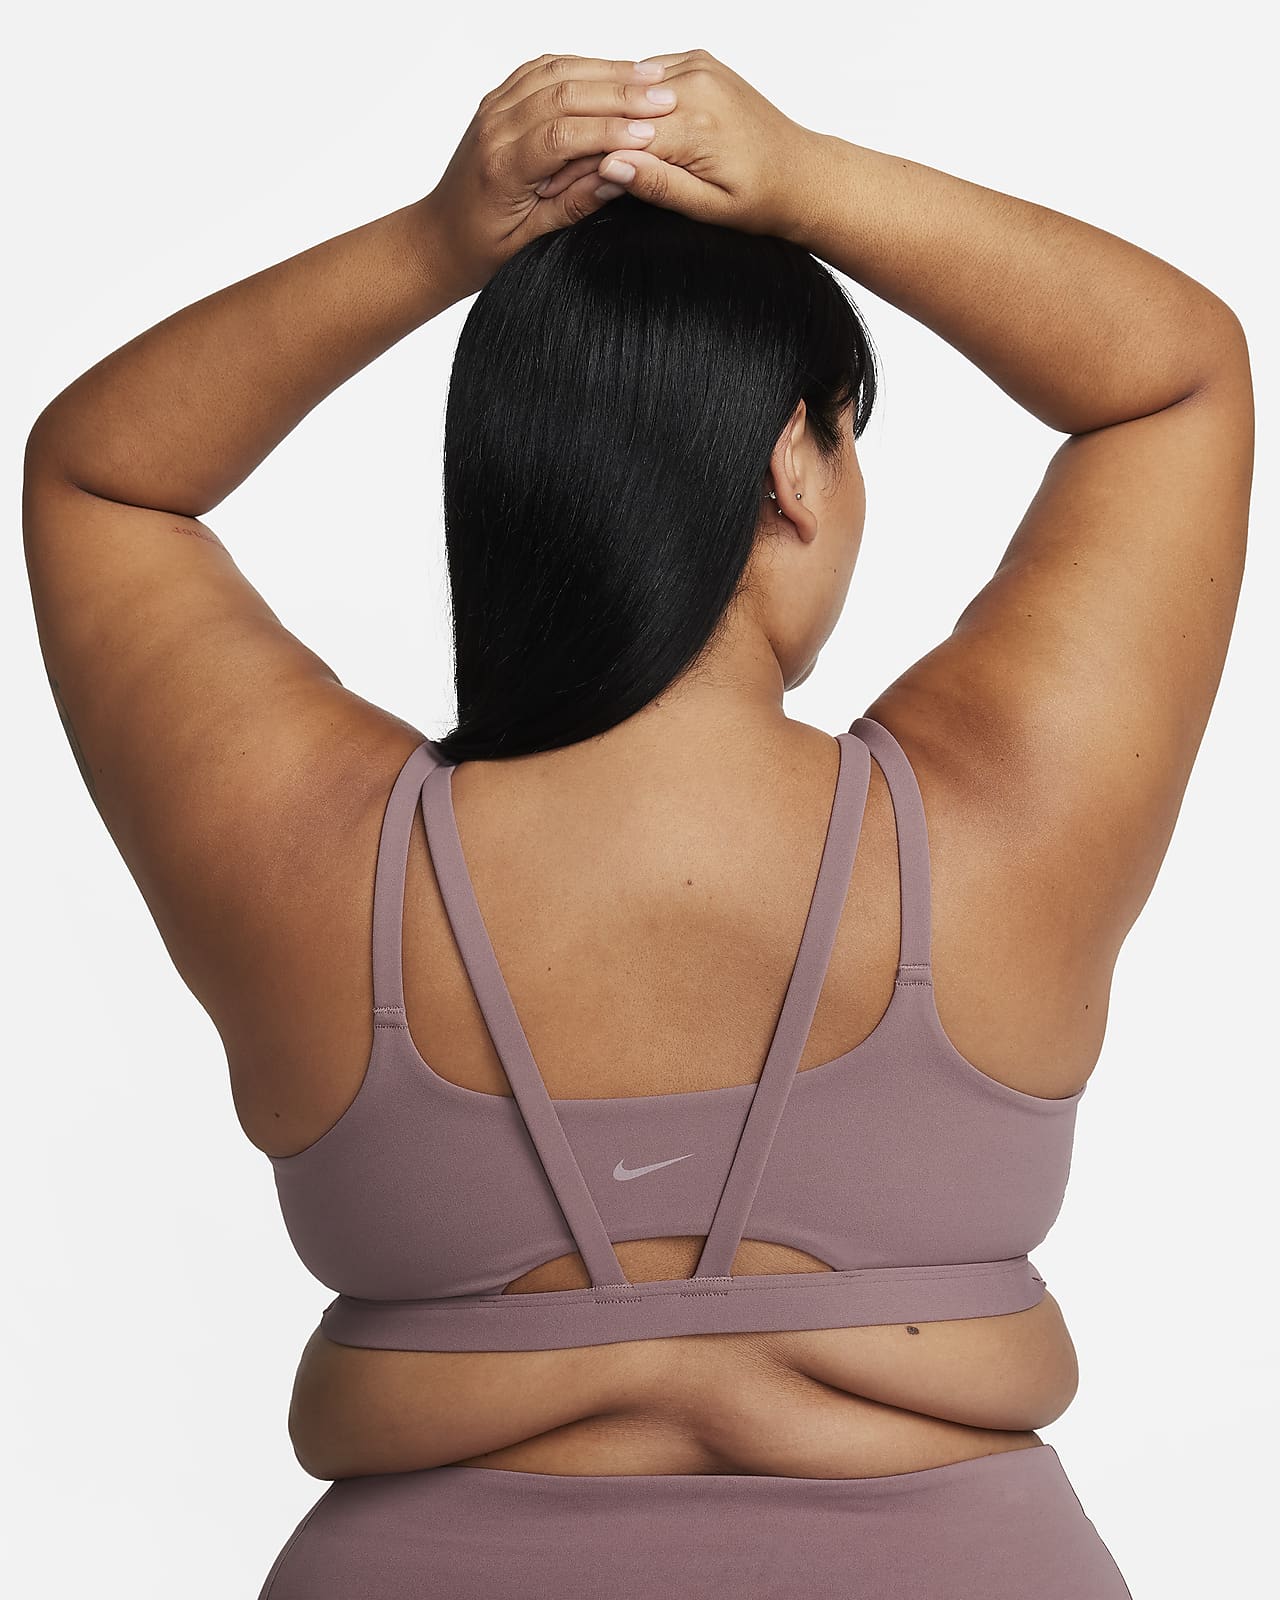 24 Padded Bras That Look Cute and Feel Supportive